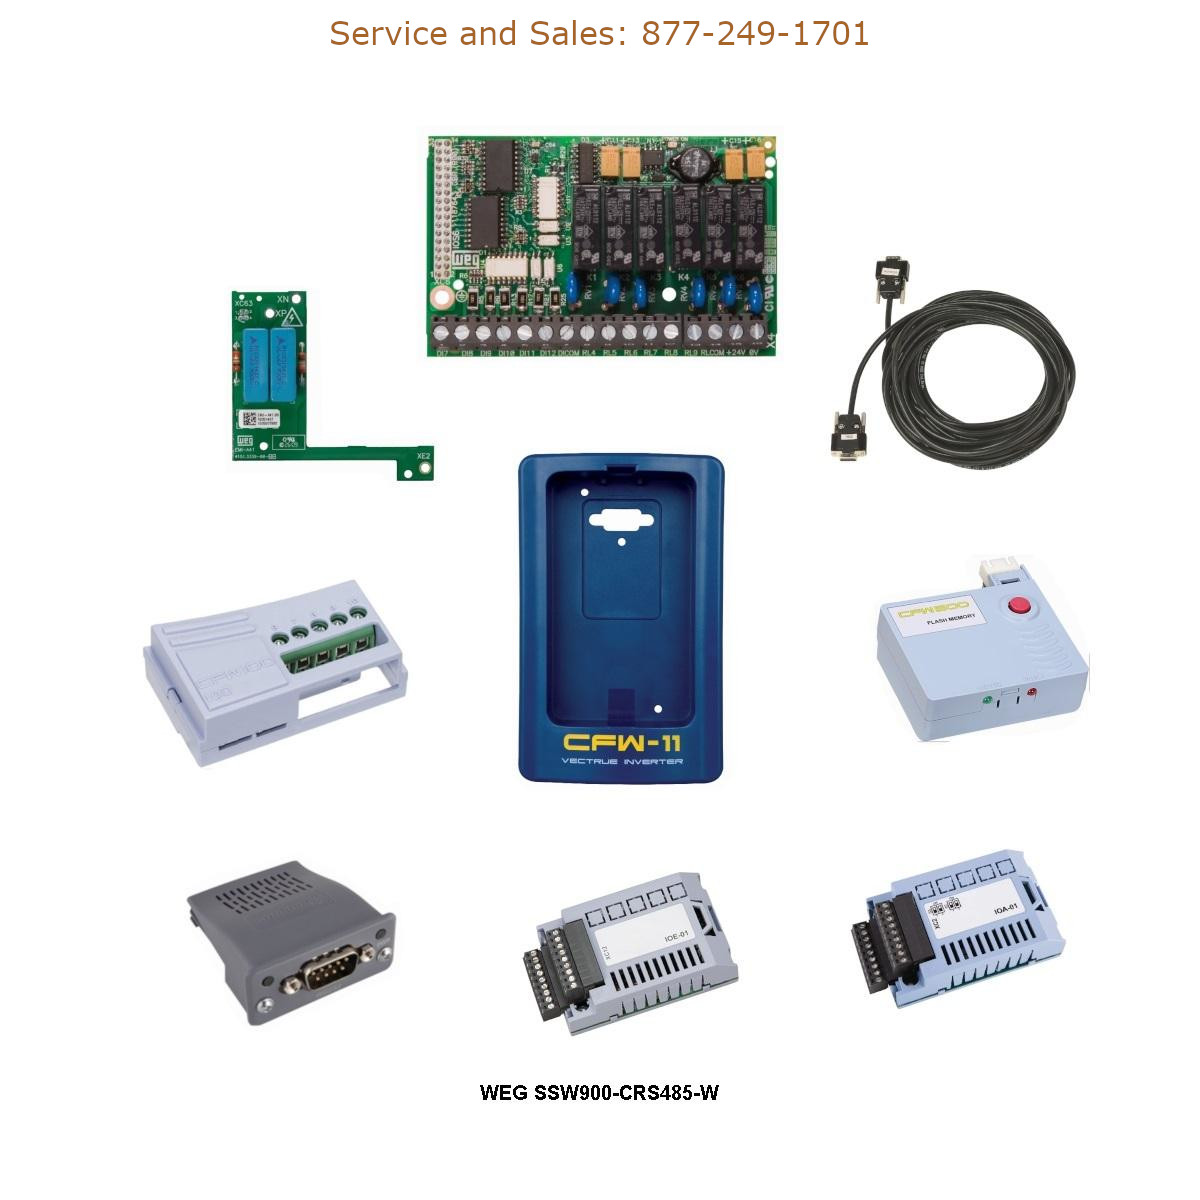 WEG SSW900-CRS485-W WEG Model Number SSW900-CRS485-W WEG Drives, Accessories for Drives Repair Service, Troubleshooting, Replacement Parts https://gesrepair.com/wp-content/uploads/2022/WEG/WEG_SSW900-CRS485-W_Drives_Accessories_for_Drives.jpg